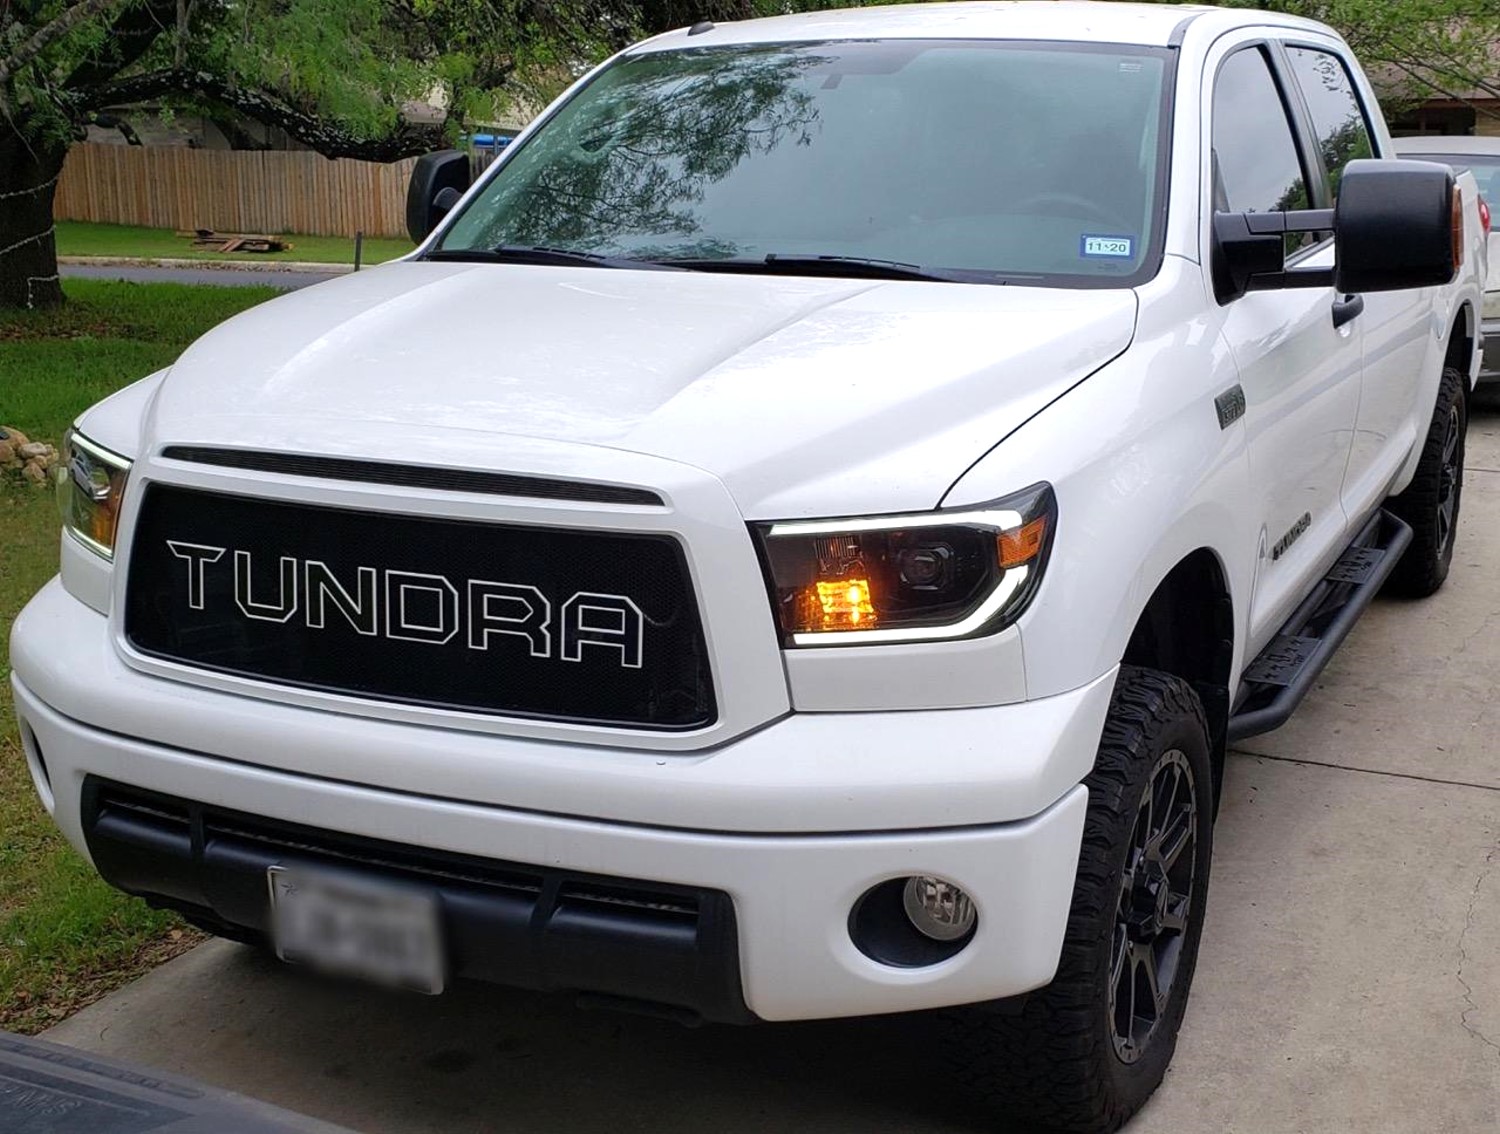 2010 - 2013 Toyota Tundra Grill Mesh with Big Letters #5